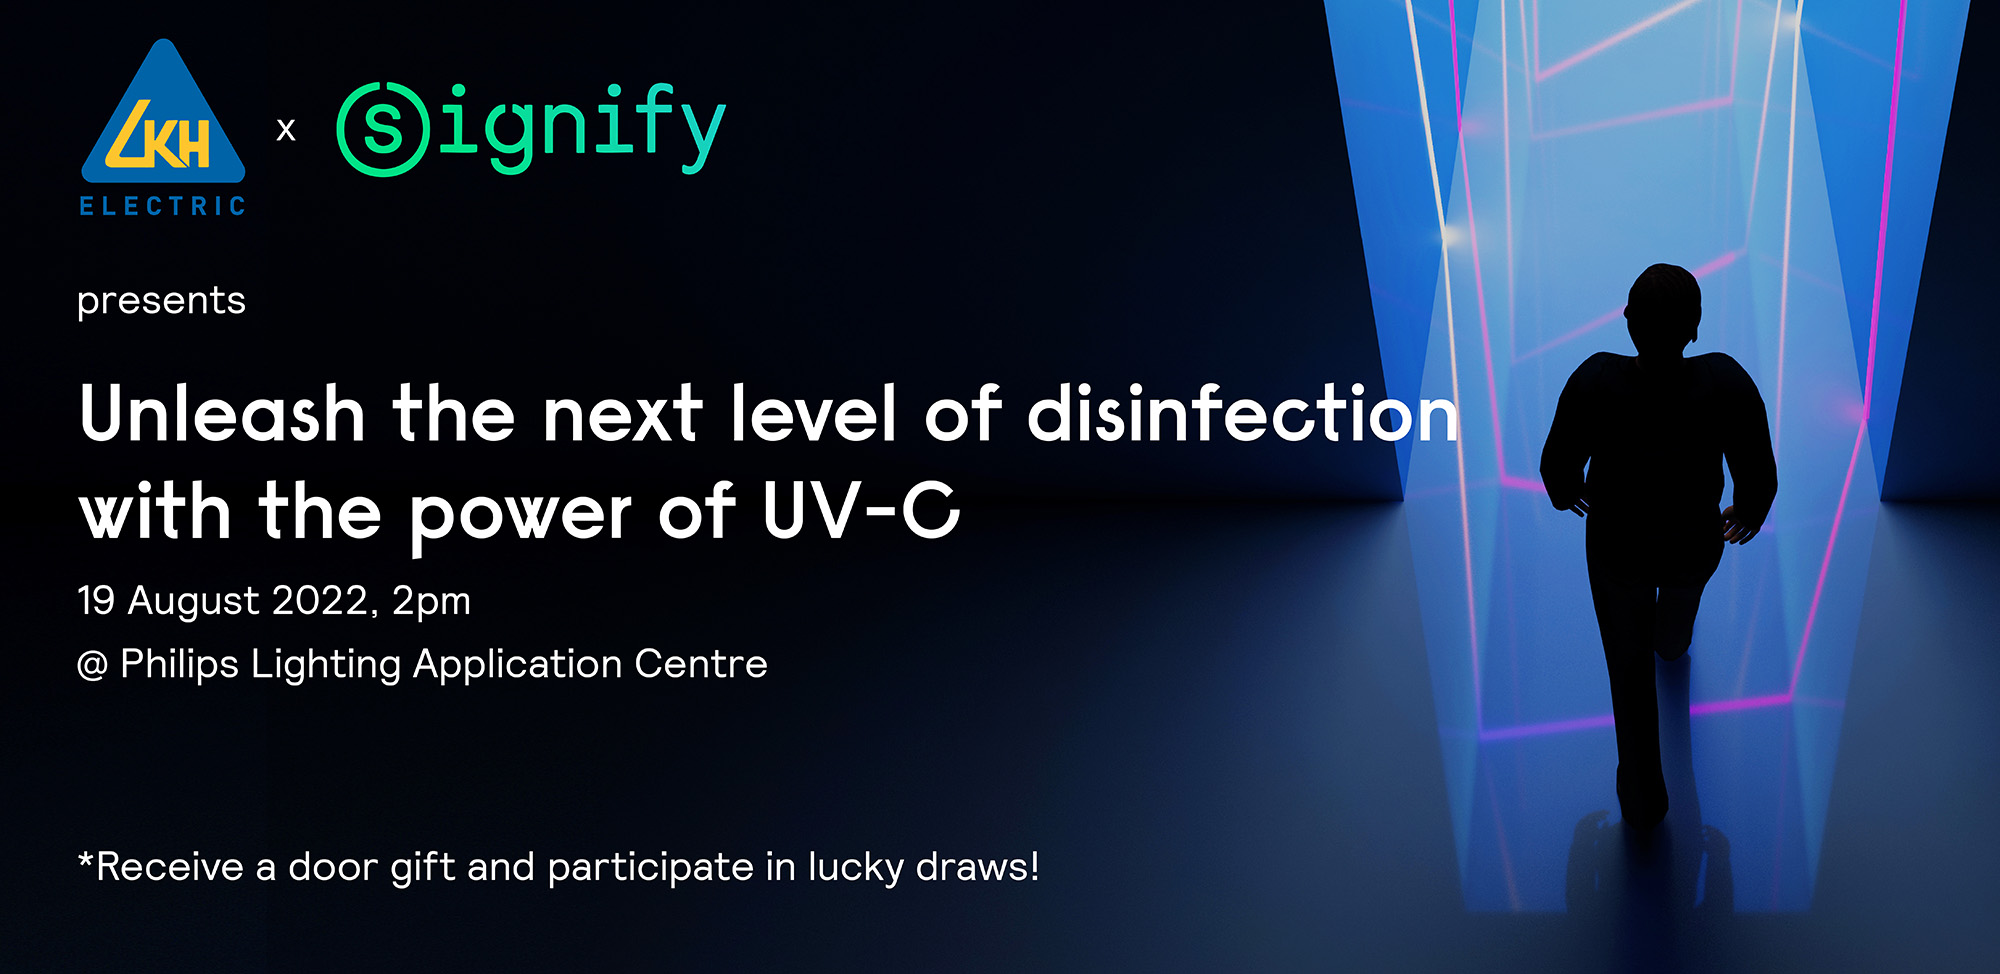 LKH Signify UVC Event